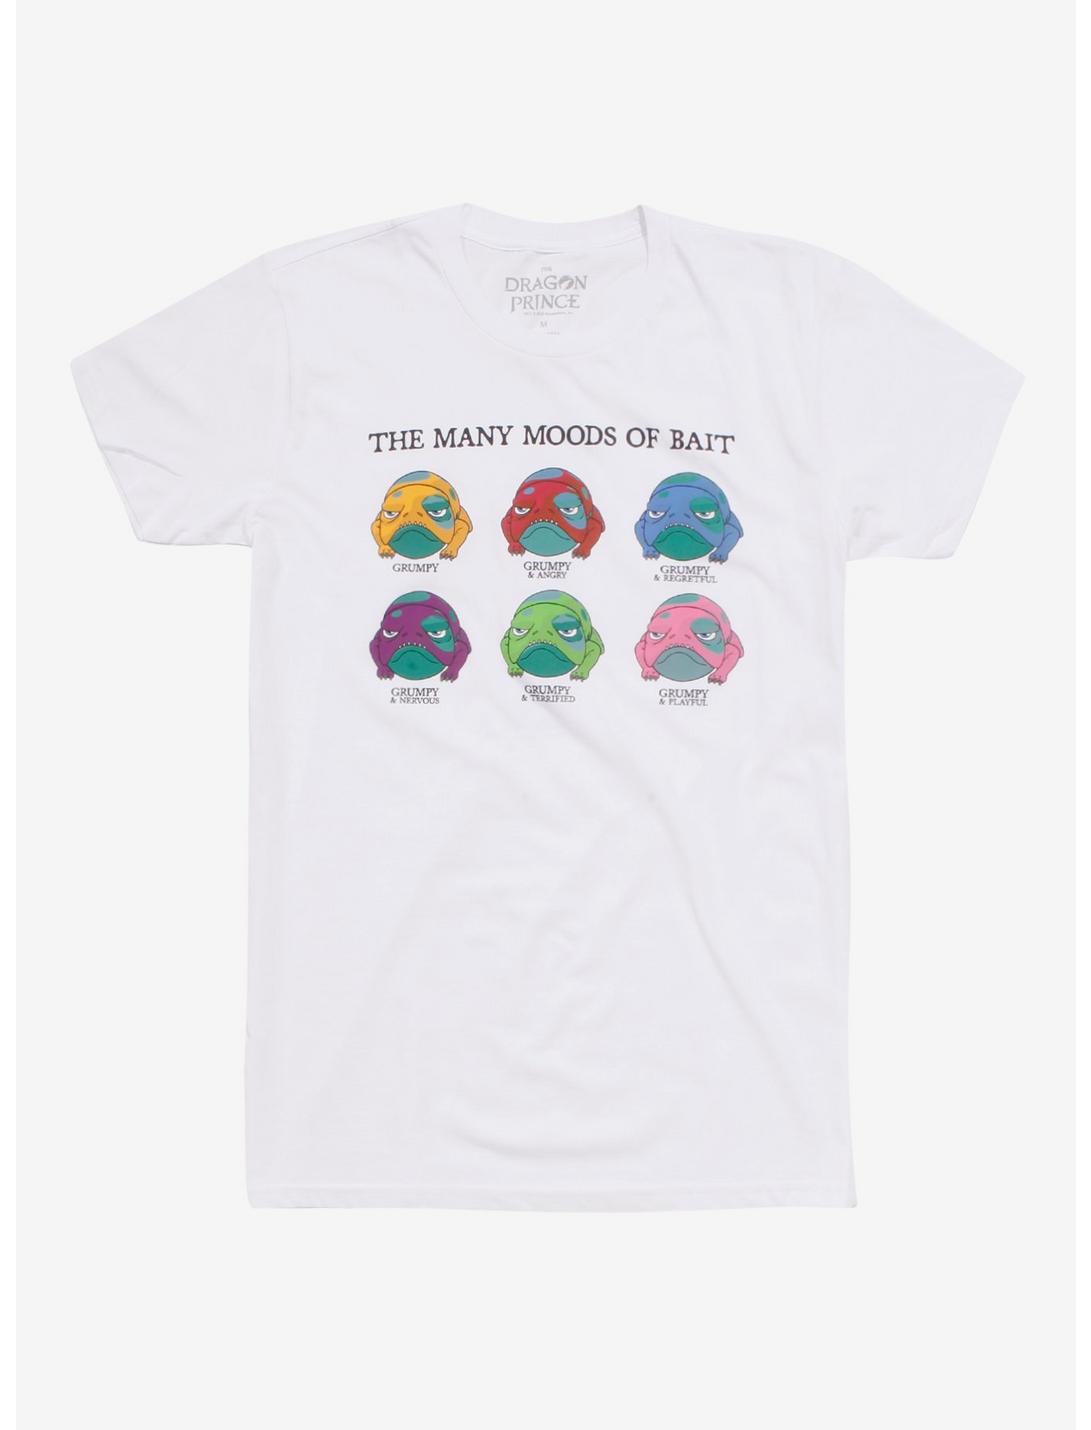 The Dragon Prince Many Moods Of Bait T-Shirt Hot Topic Exclusive, WHITE, hi-res